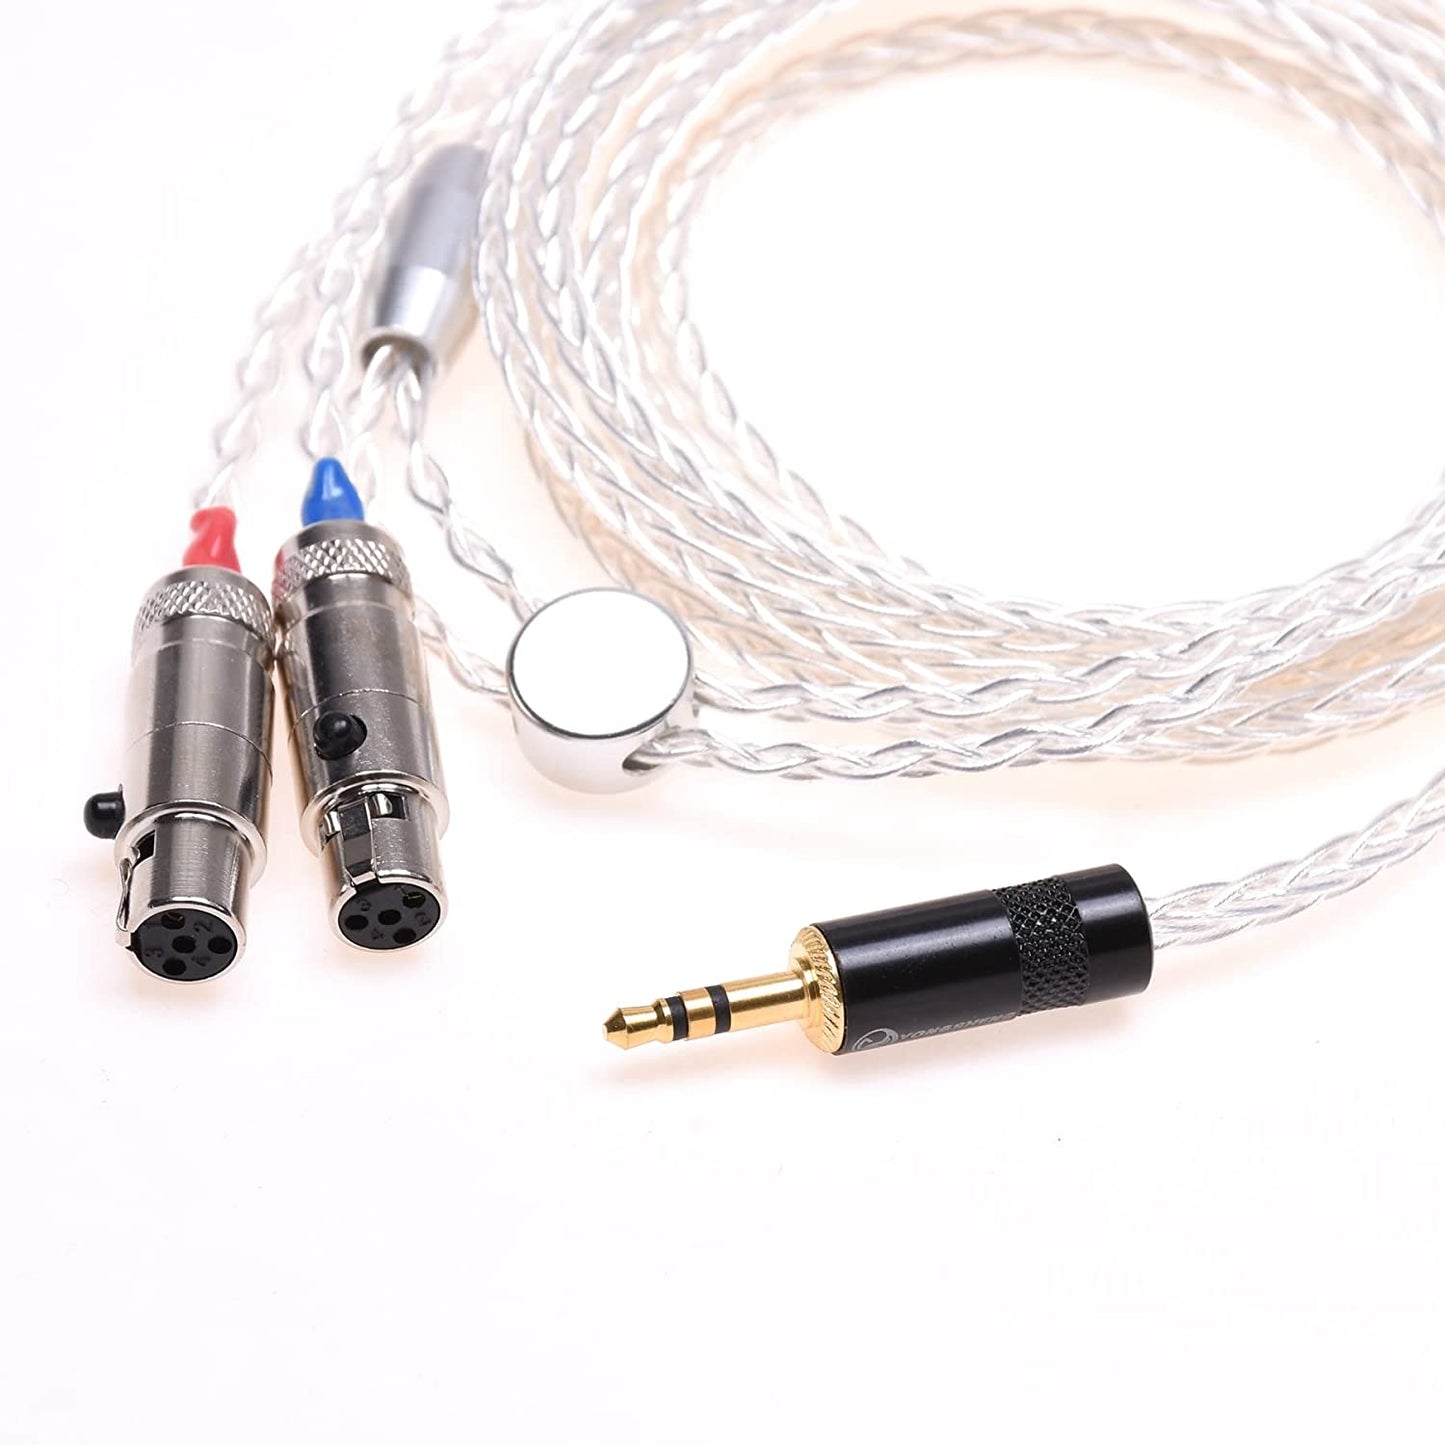 Silver Plated Headphone Upgrade Cable for ZMF Eikon Auteur Audeze LCD-2 LCD-3 LCD-4 LCD-X LCD-XC